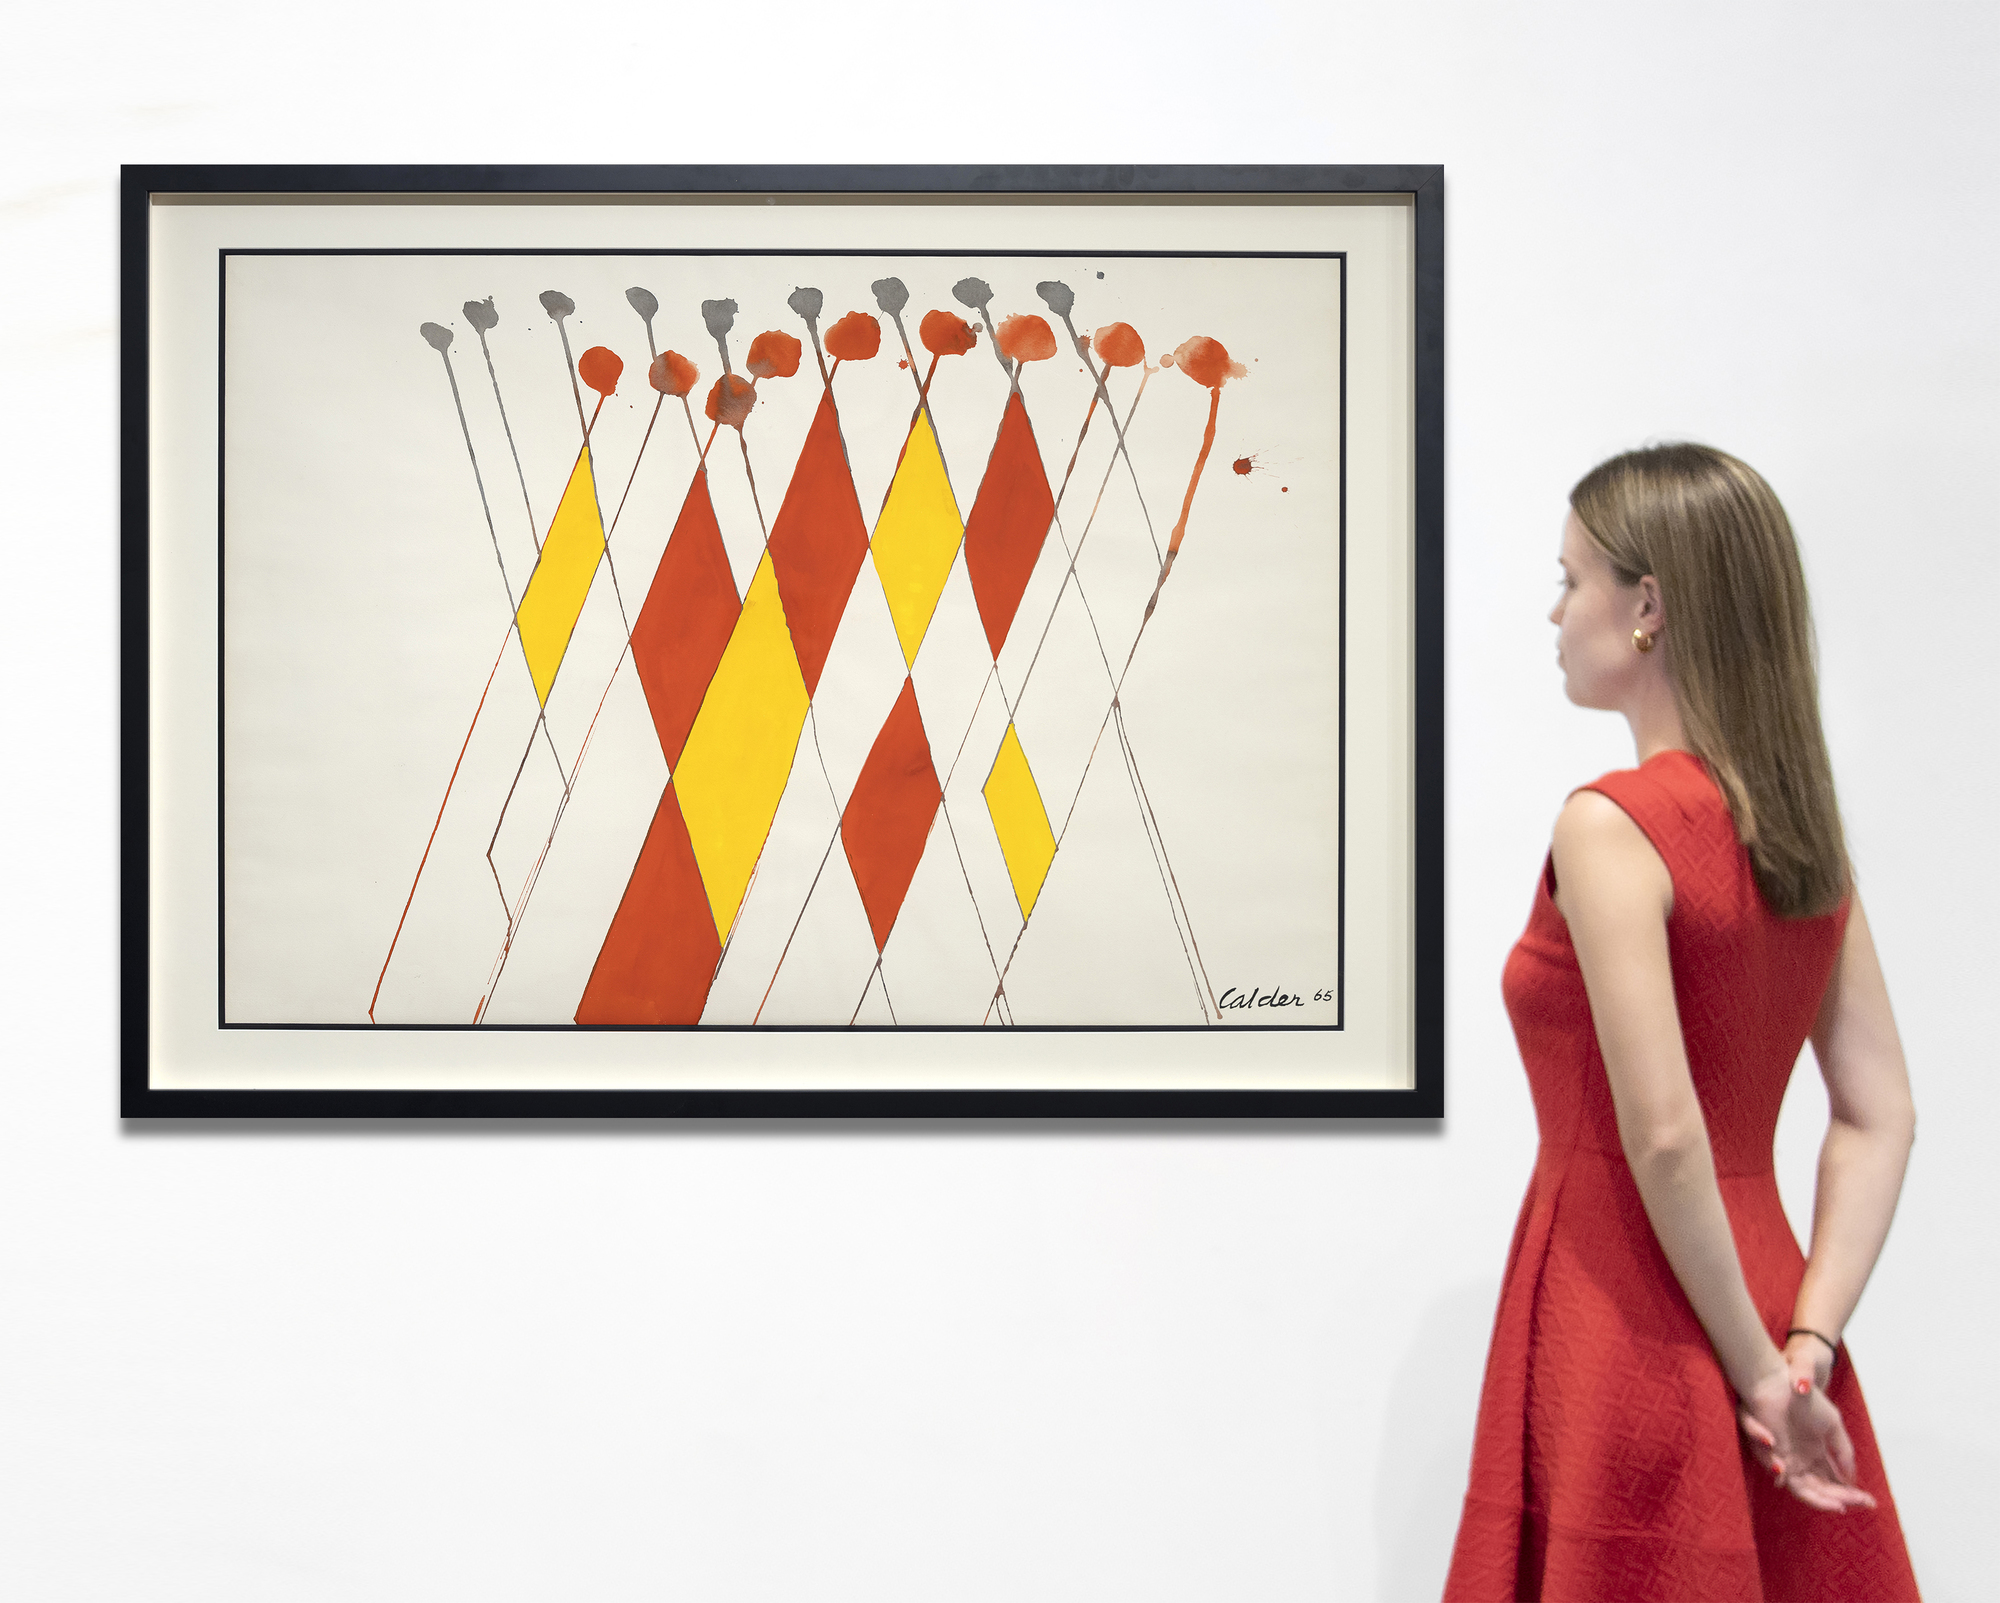 "Wigwam rouge et jaune", a captivating gouache painting by Alexander Calder, is a vibrant exploration of design and color. Dominated by a lattice of diagonal lines intersecting near their pinnacle, the composition exudes a dynamic balance. Calder introduces an element of whimsy with red and yellow diamond shapes, infusing the piece with playfulness and creating a festive atmosphere. Red balls at the right-leaning lines' apex evoke a whimsical impression, while smaller gray spheres atop left-leaning lines offer contrast and equilibrium. Calder's masterful fusion of simplicity and vital design elements makes Wigwam rouge et jaune a visual delight.